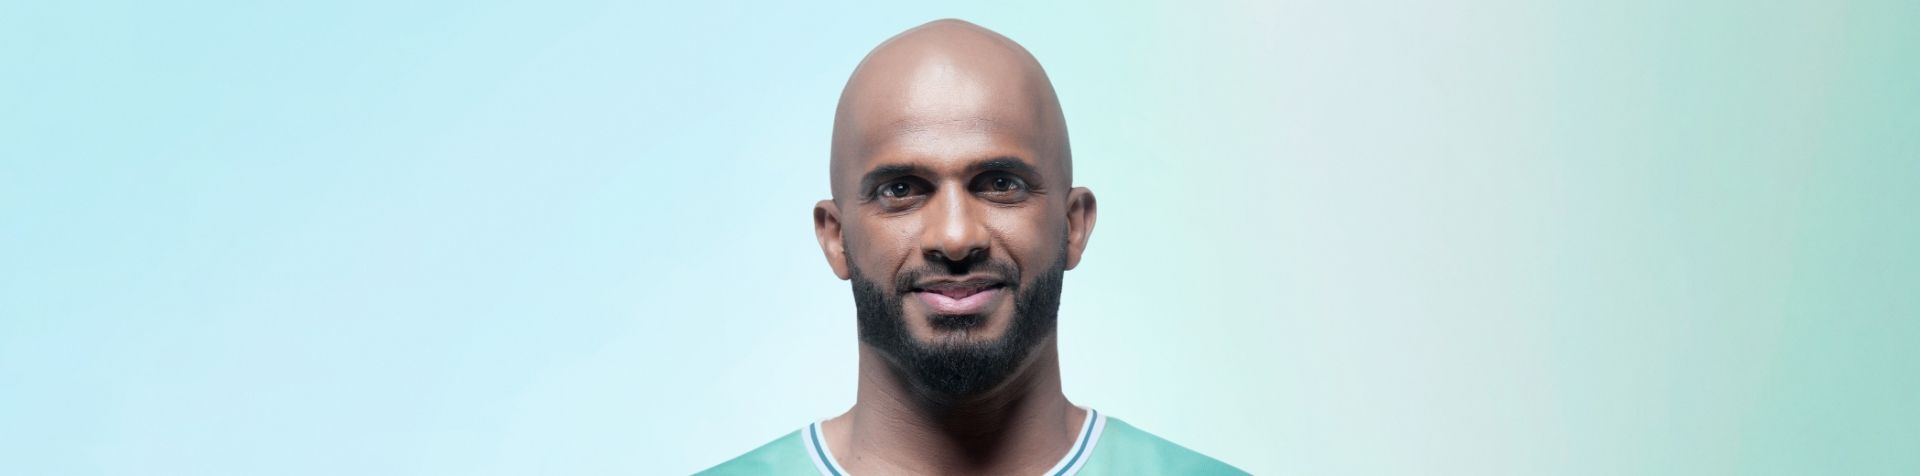 A portrait of smiling male football player and Team Century member Ali Al-Habsi in front of a blue and green background.